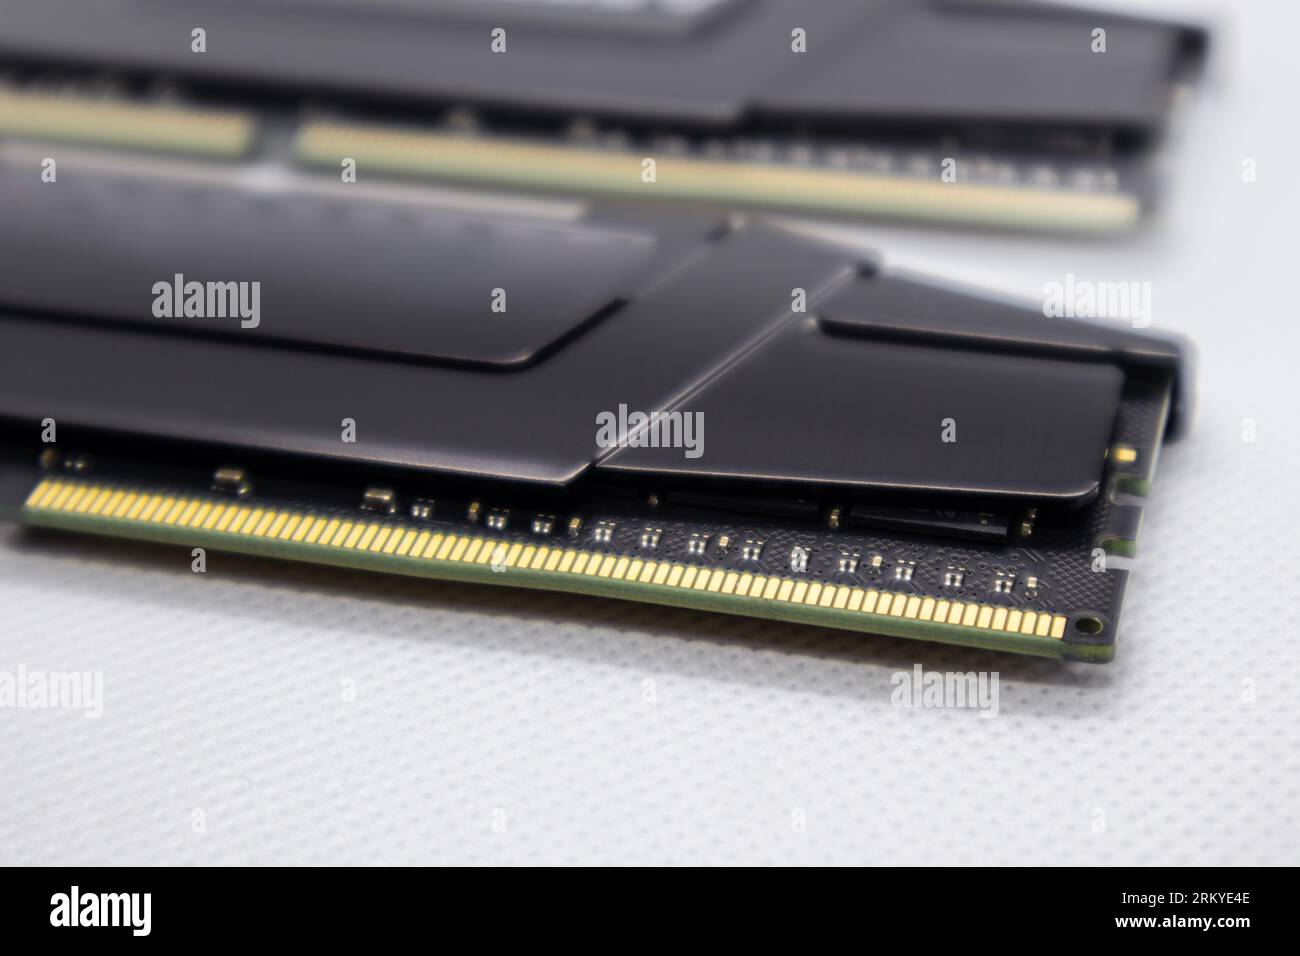 DDR4 DRAM memory modules. Computer RAM chip close-up on white. Desktop PC memory parts for assemble Stock Photo